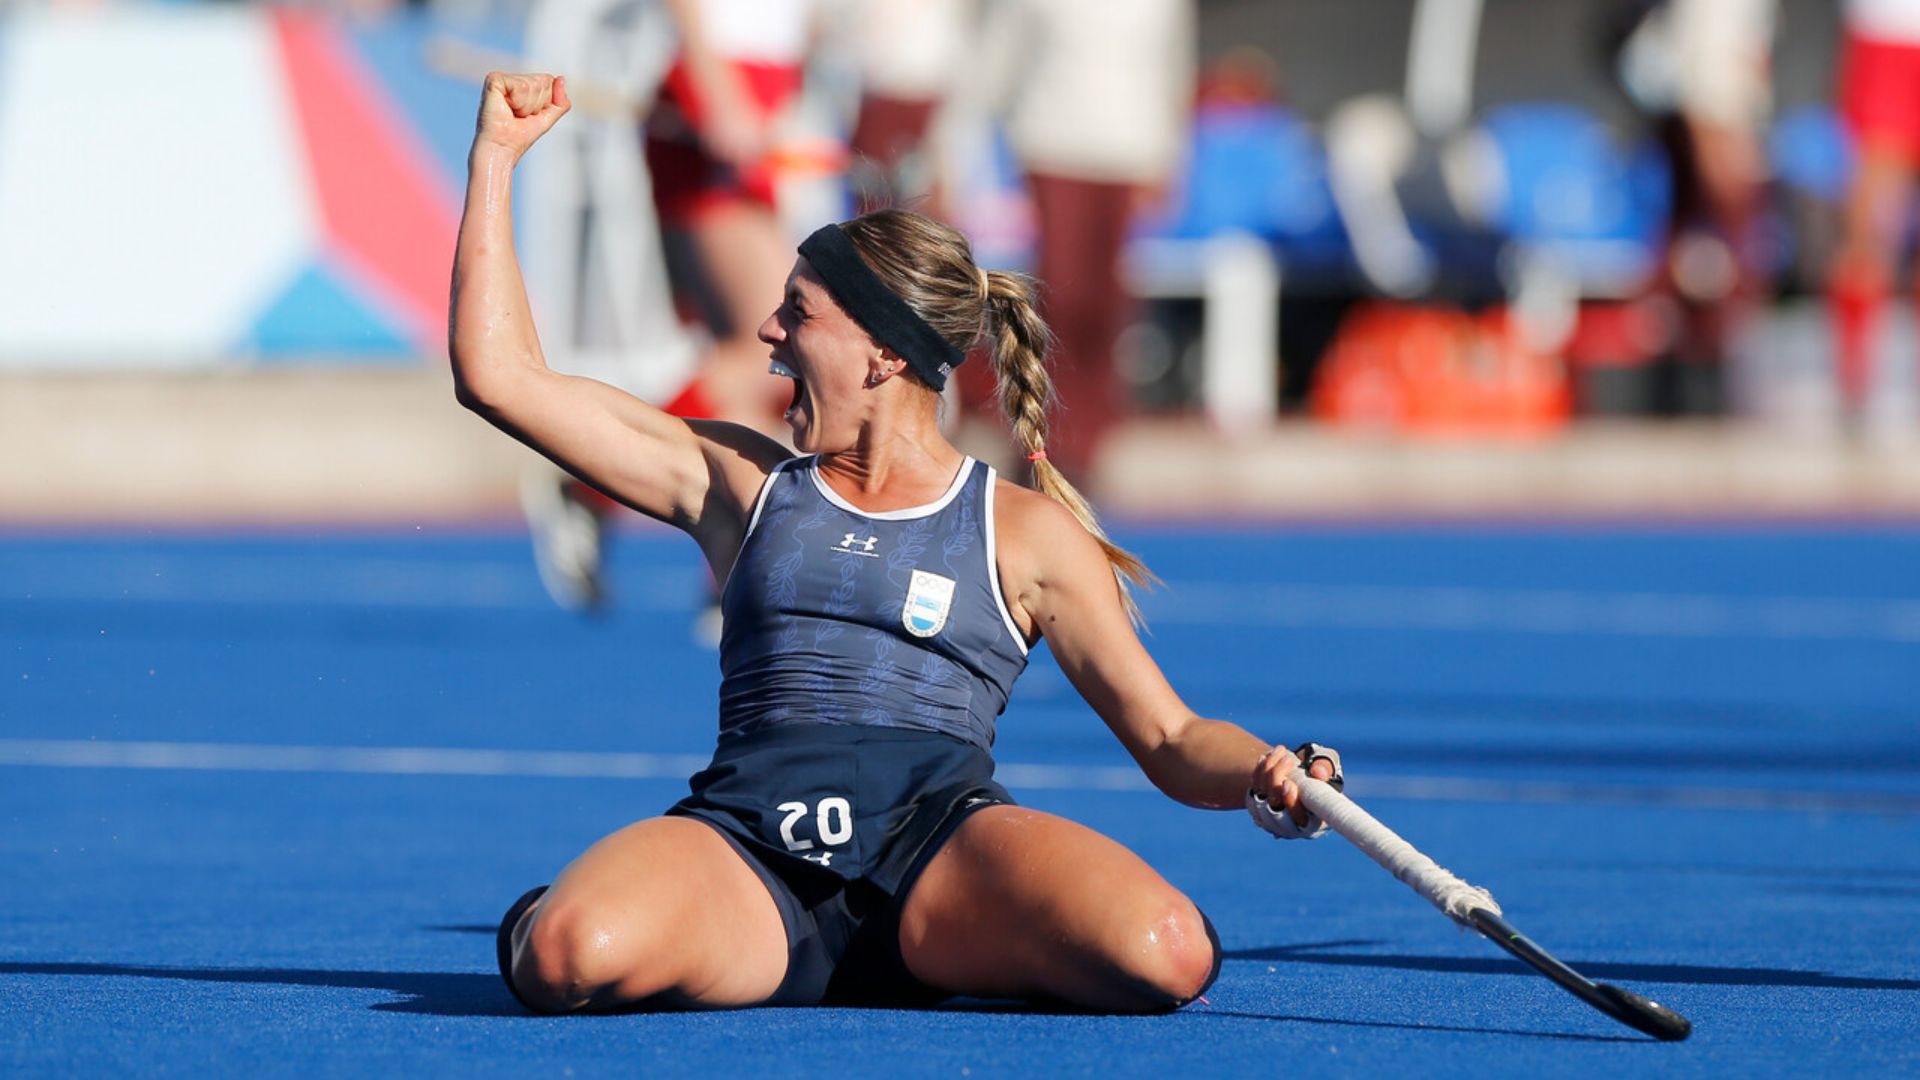 Argentina defeats Canada and seek to revalidate the female's field hockey gold